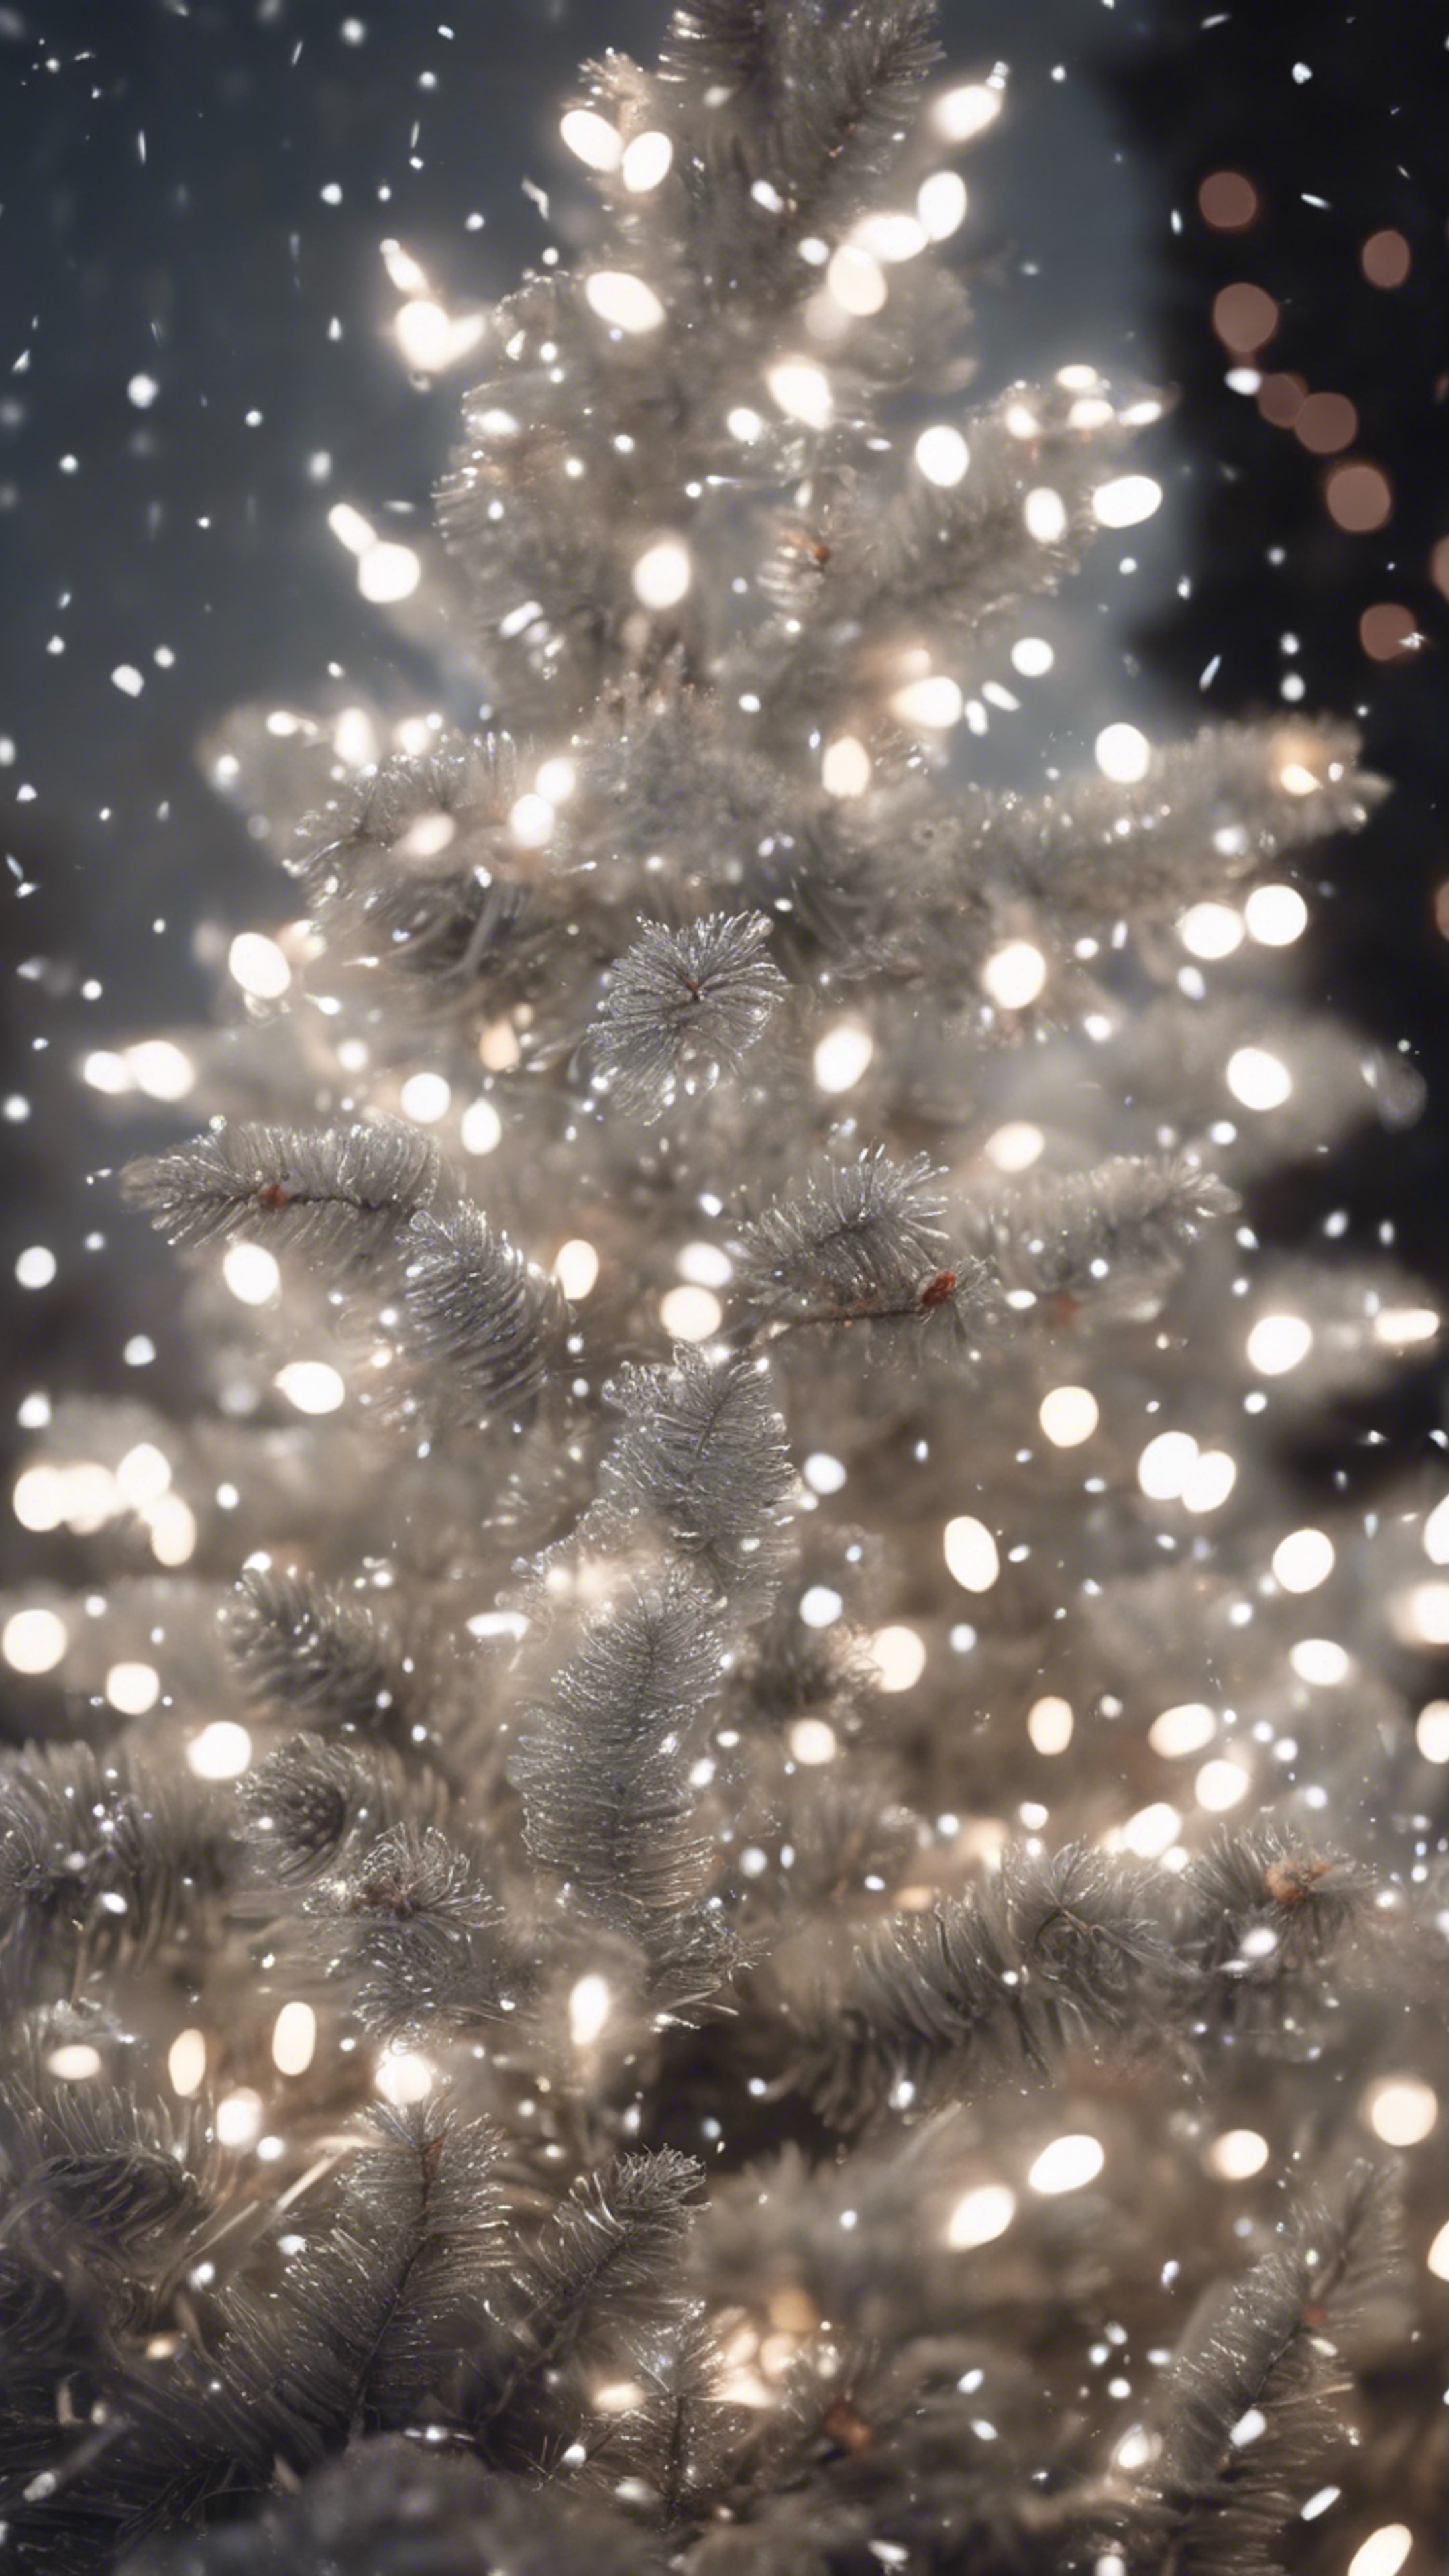 White Christmas lights shimmering on a silver spruce tree, with delicate snowflakes falling around. Wallpaper[aebc3baa8421448a9f7c]